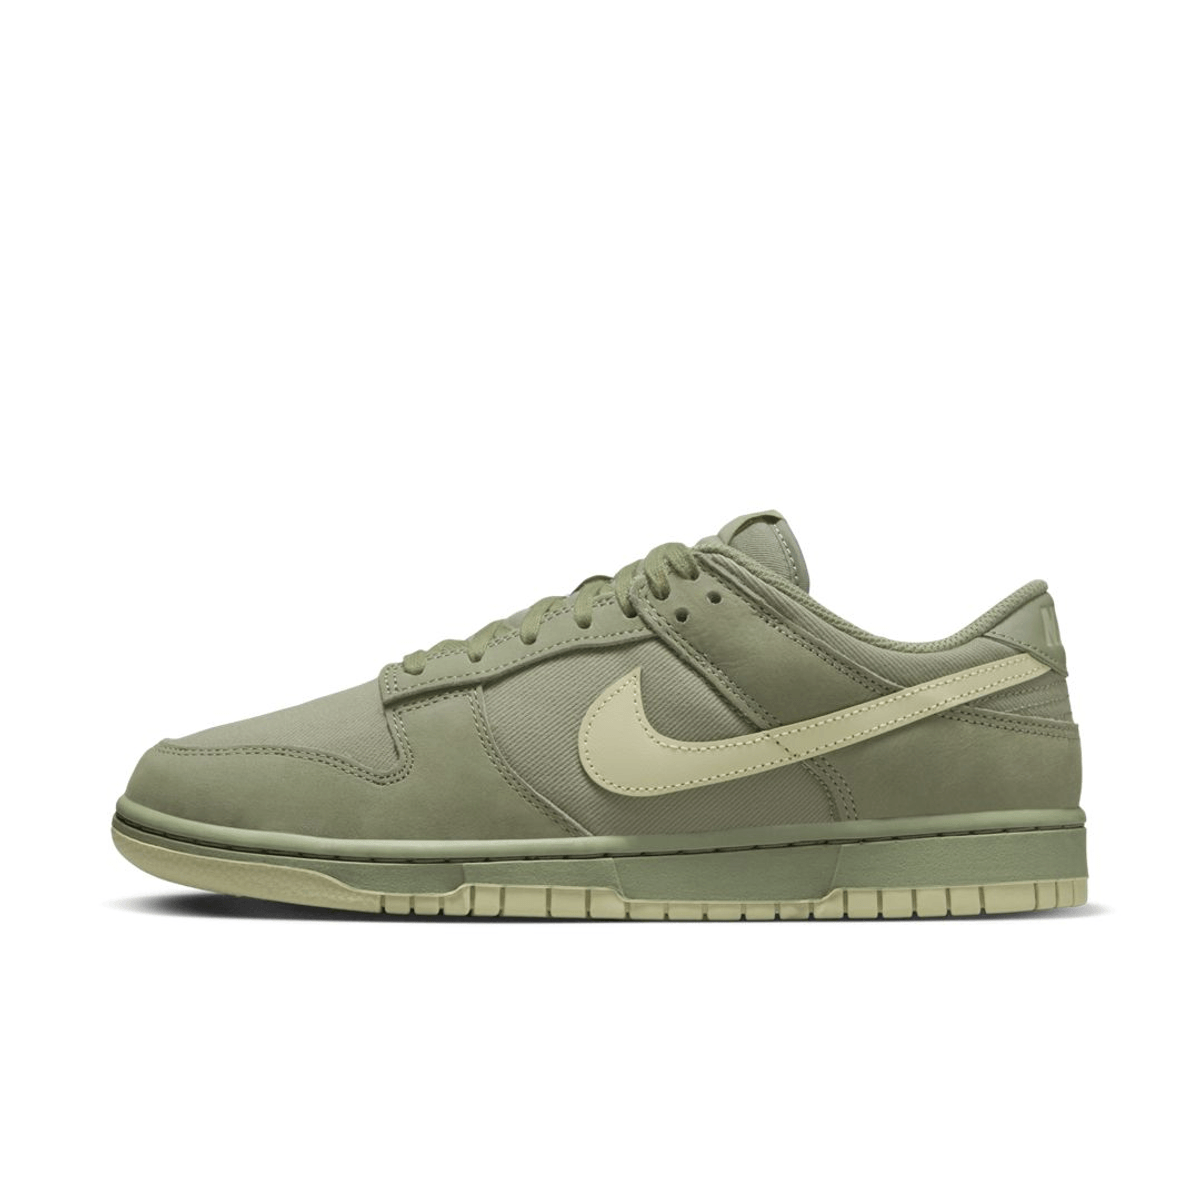 Official Images Of The Nike Dunk Low Premium "Oil Green"